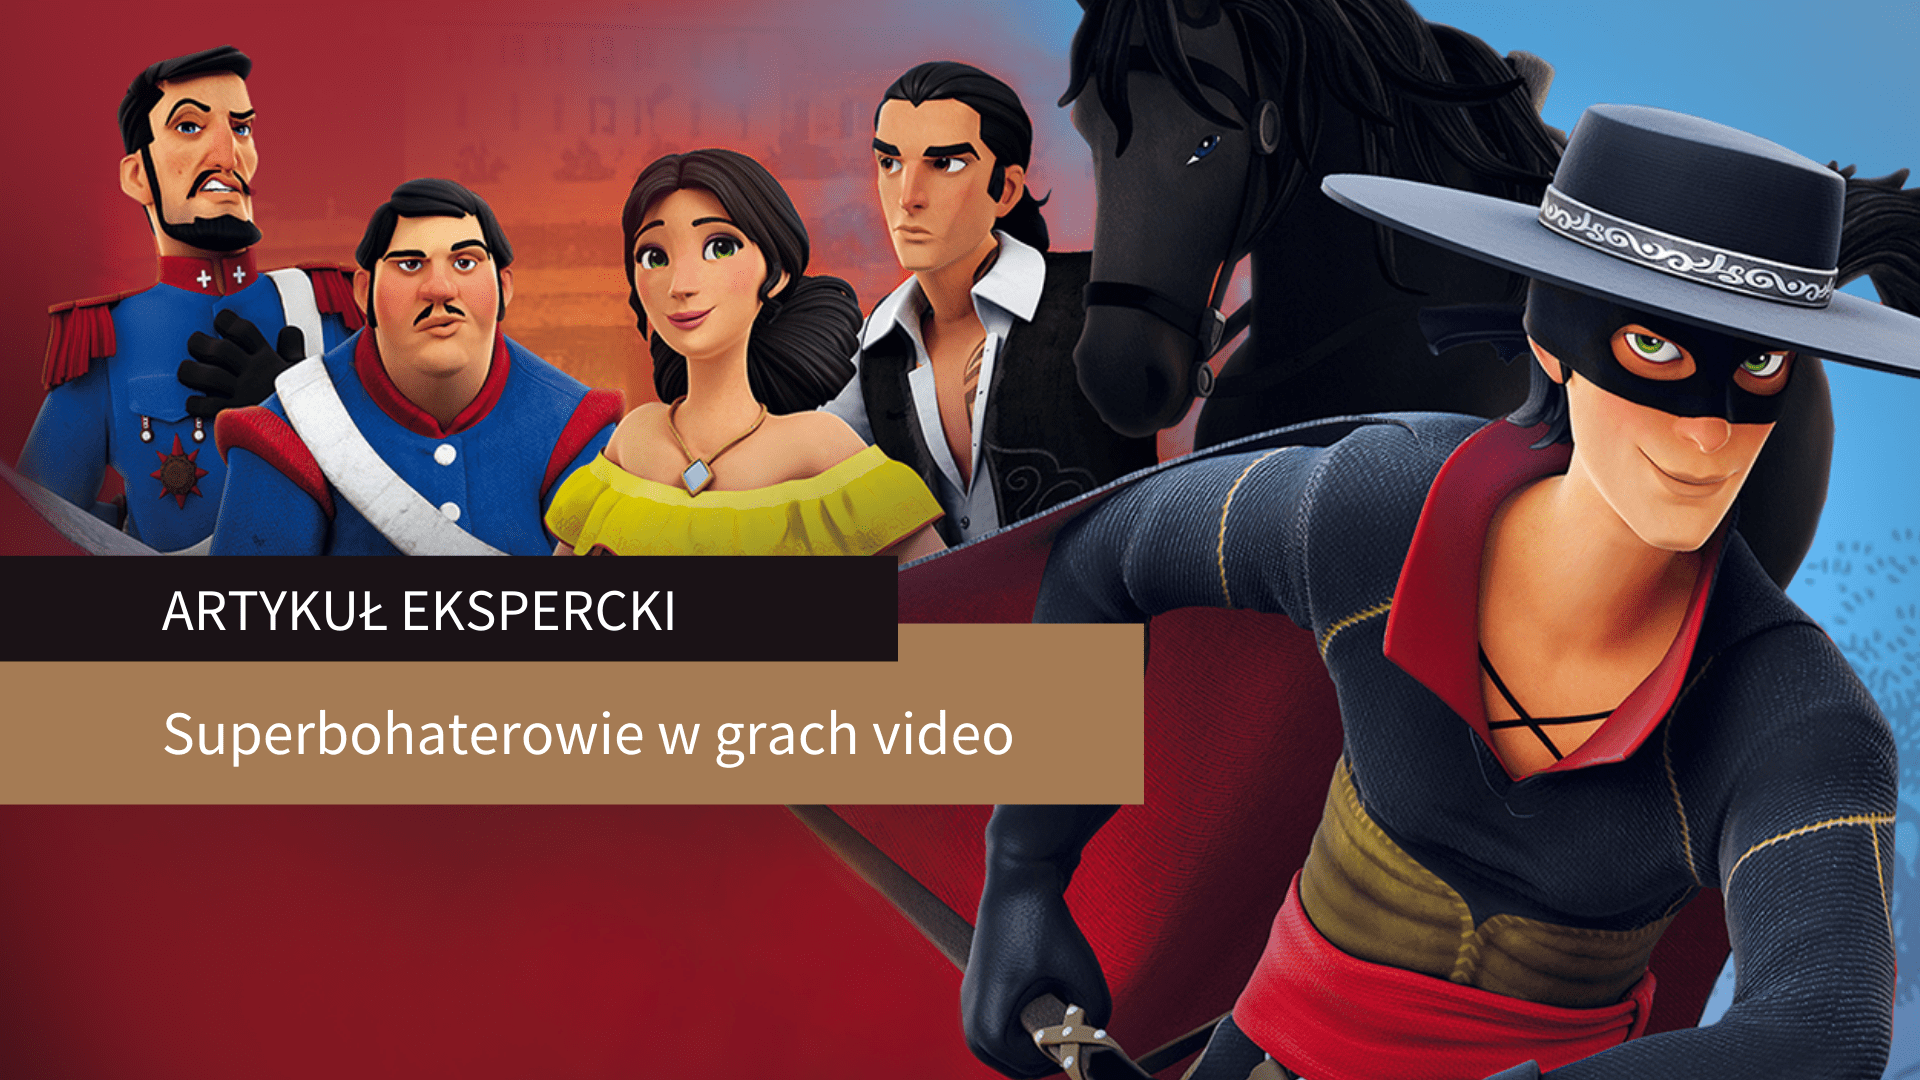 Superbohaterowie w grach video